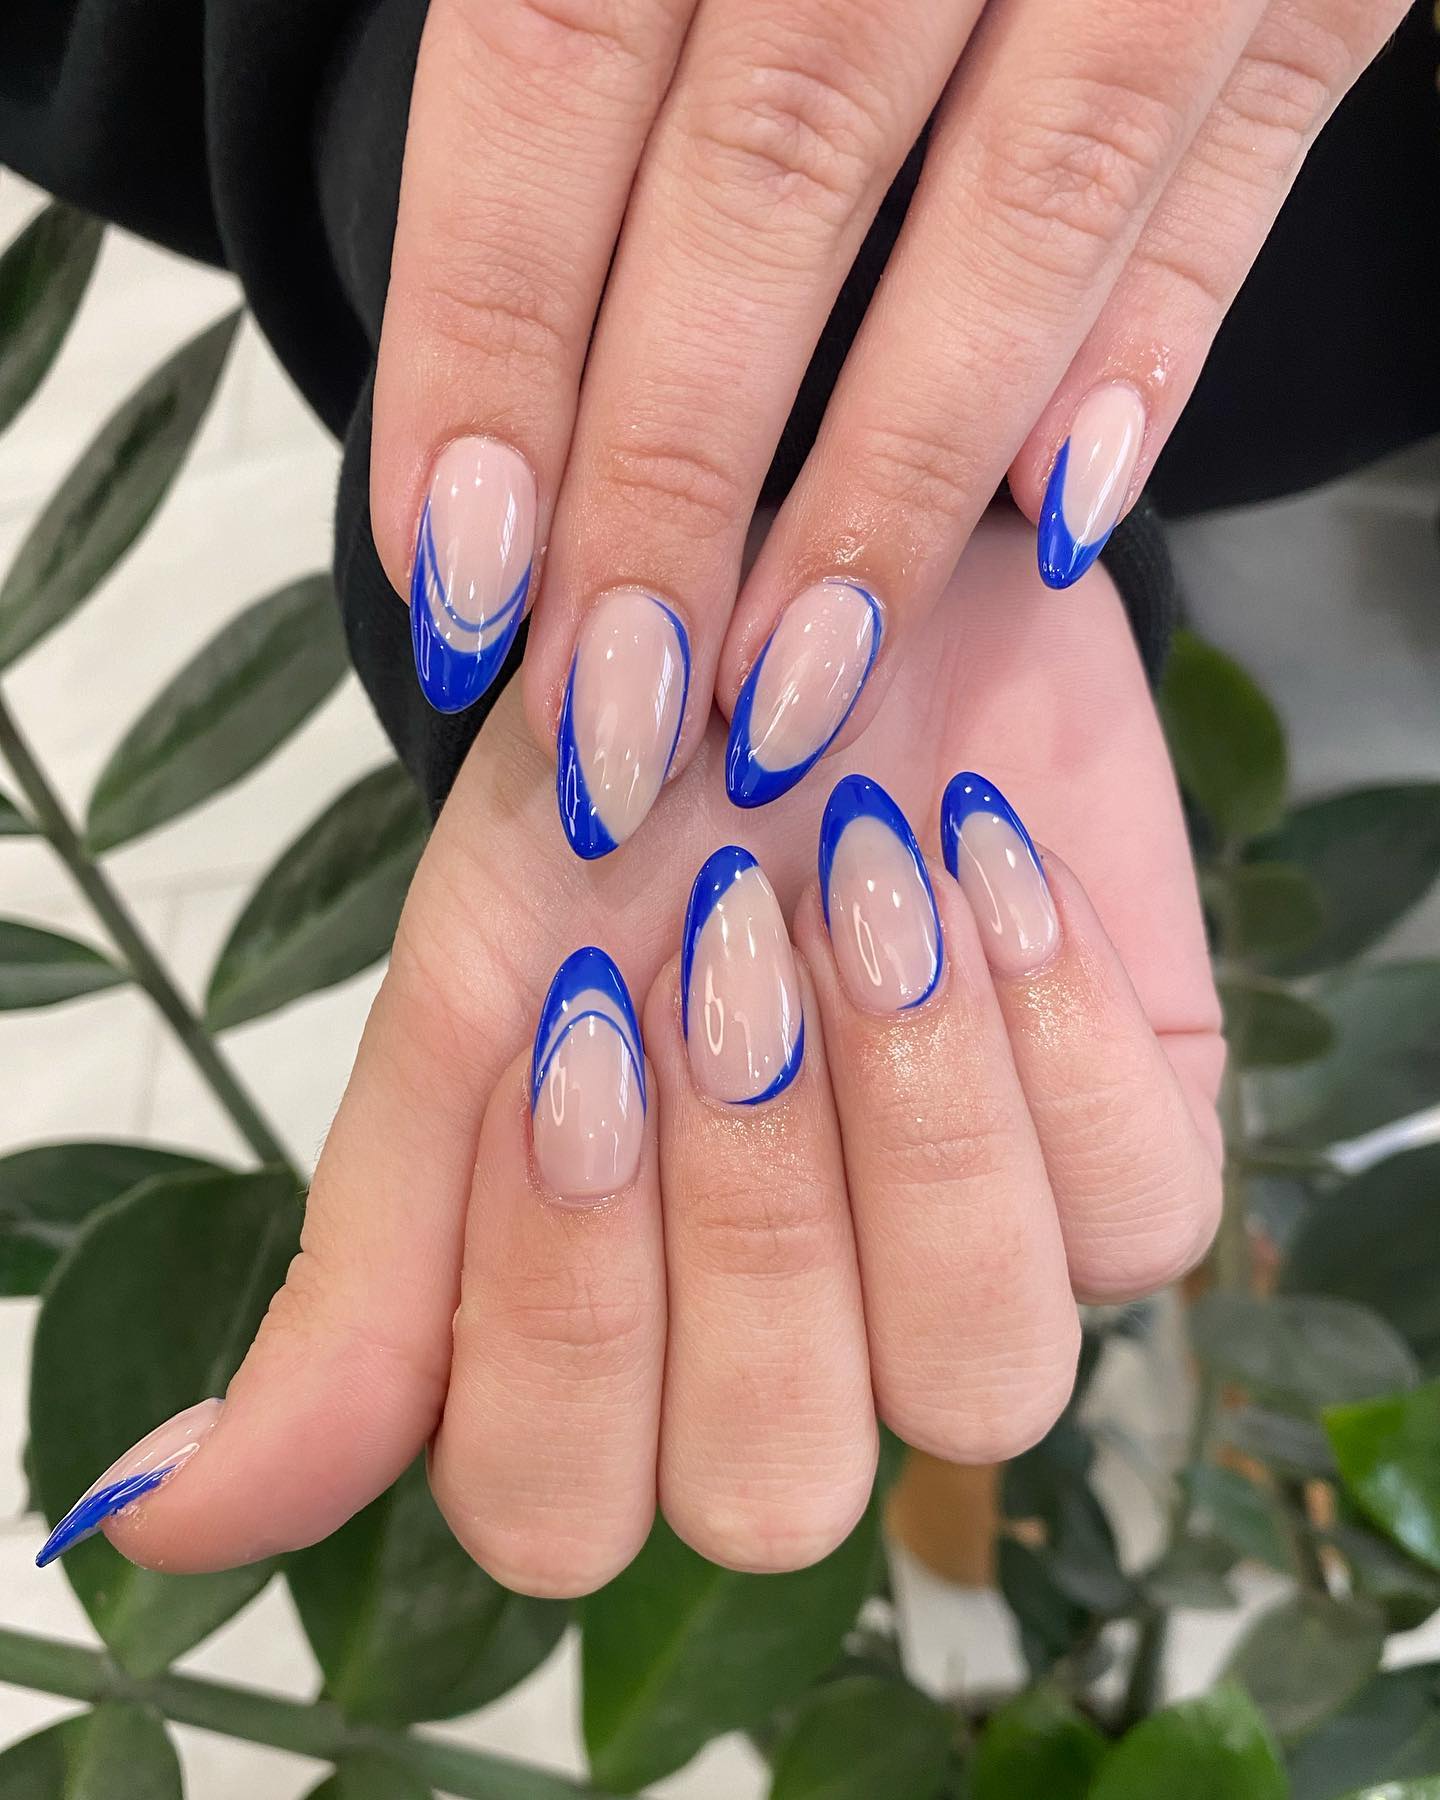 Deep Blue Almond French Tip Nails